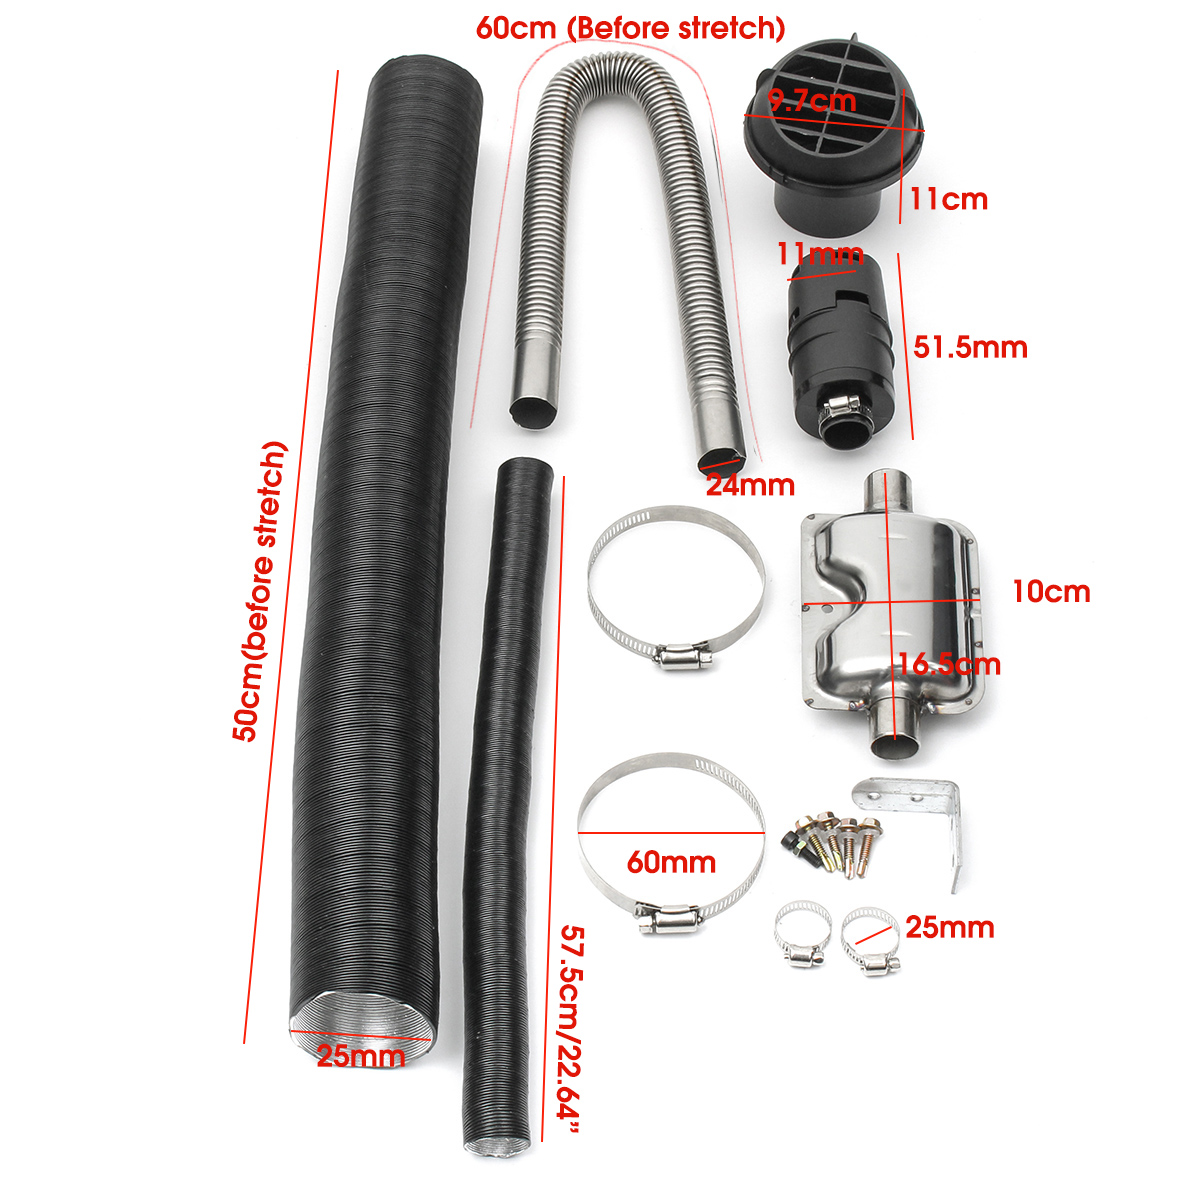 24mm-Exhaust-Silencer-25mm-Filter-Exhaust--Intake-Pipe-For-Air-Diesel-Heater-1412374-3